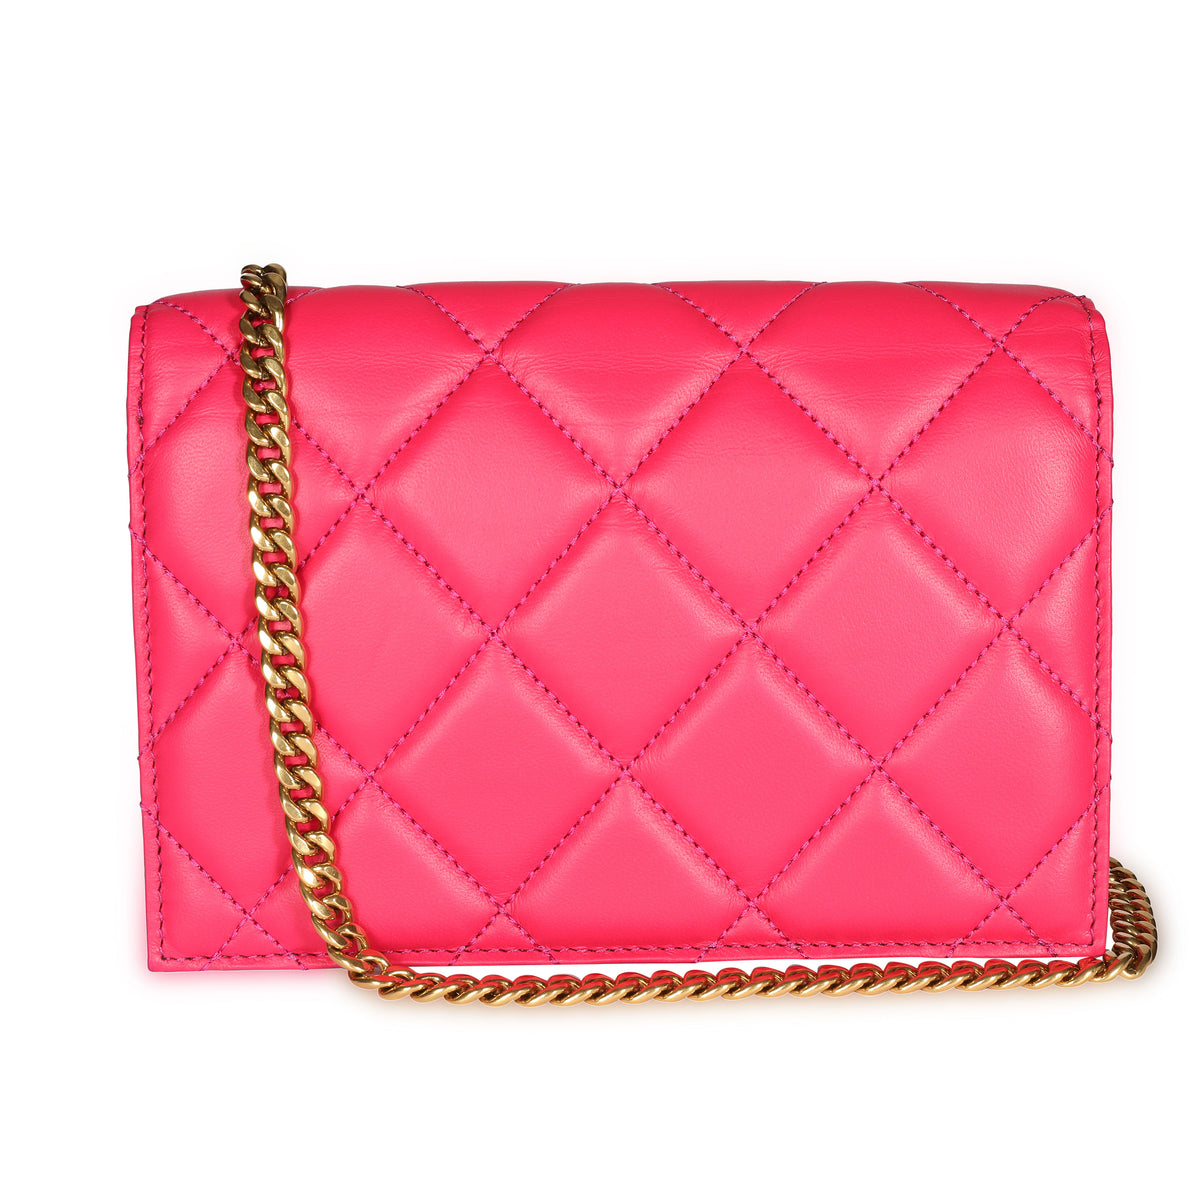 Alexander McQueen Hot Pink Quilted Leather Mini Skull Crossbody Bag, myGemma